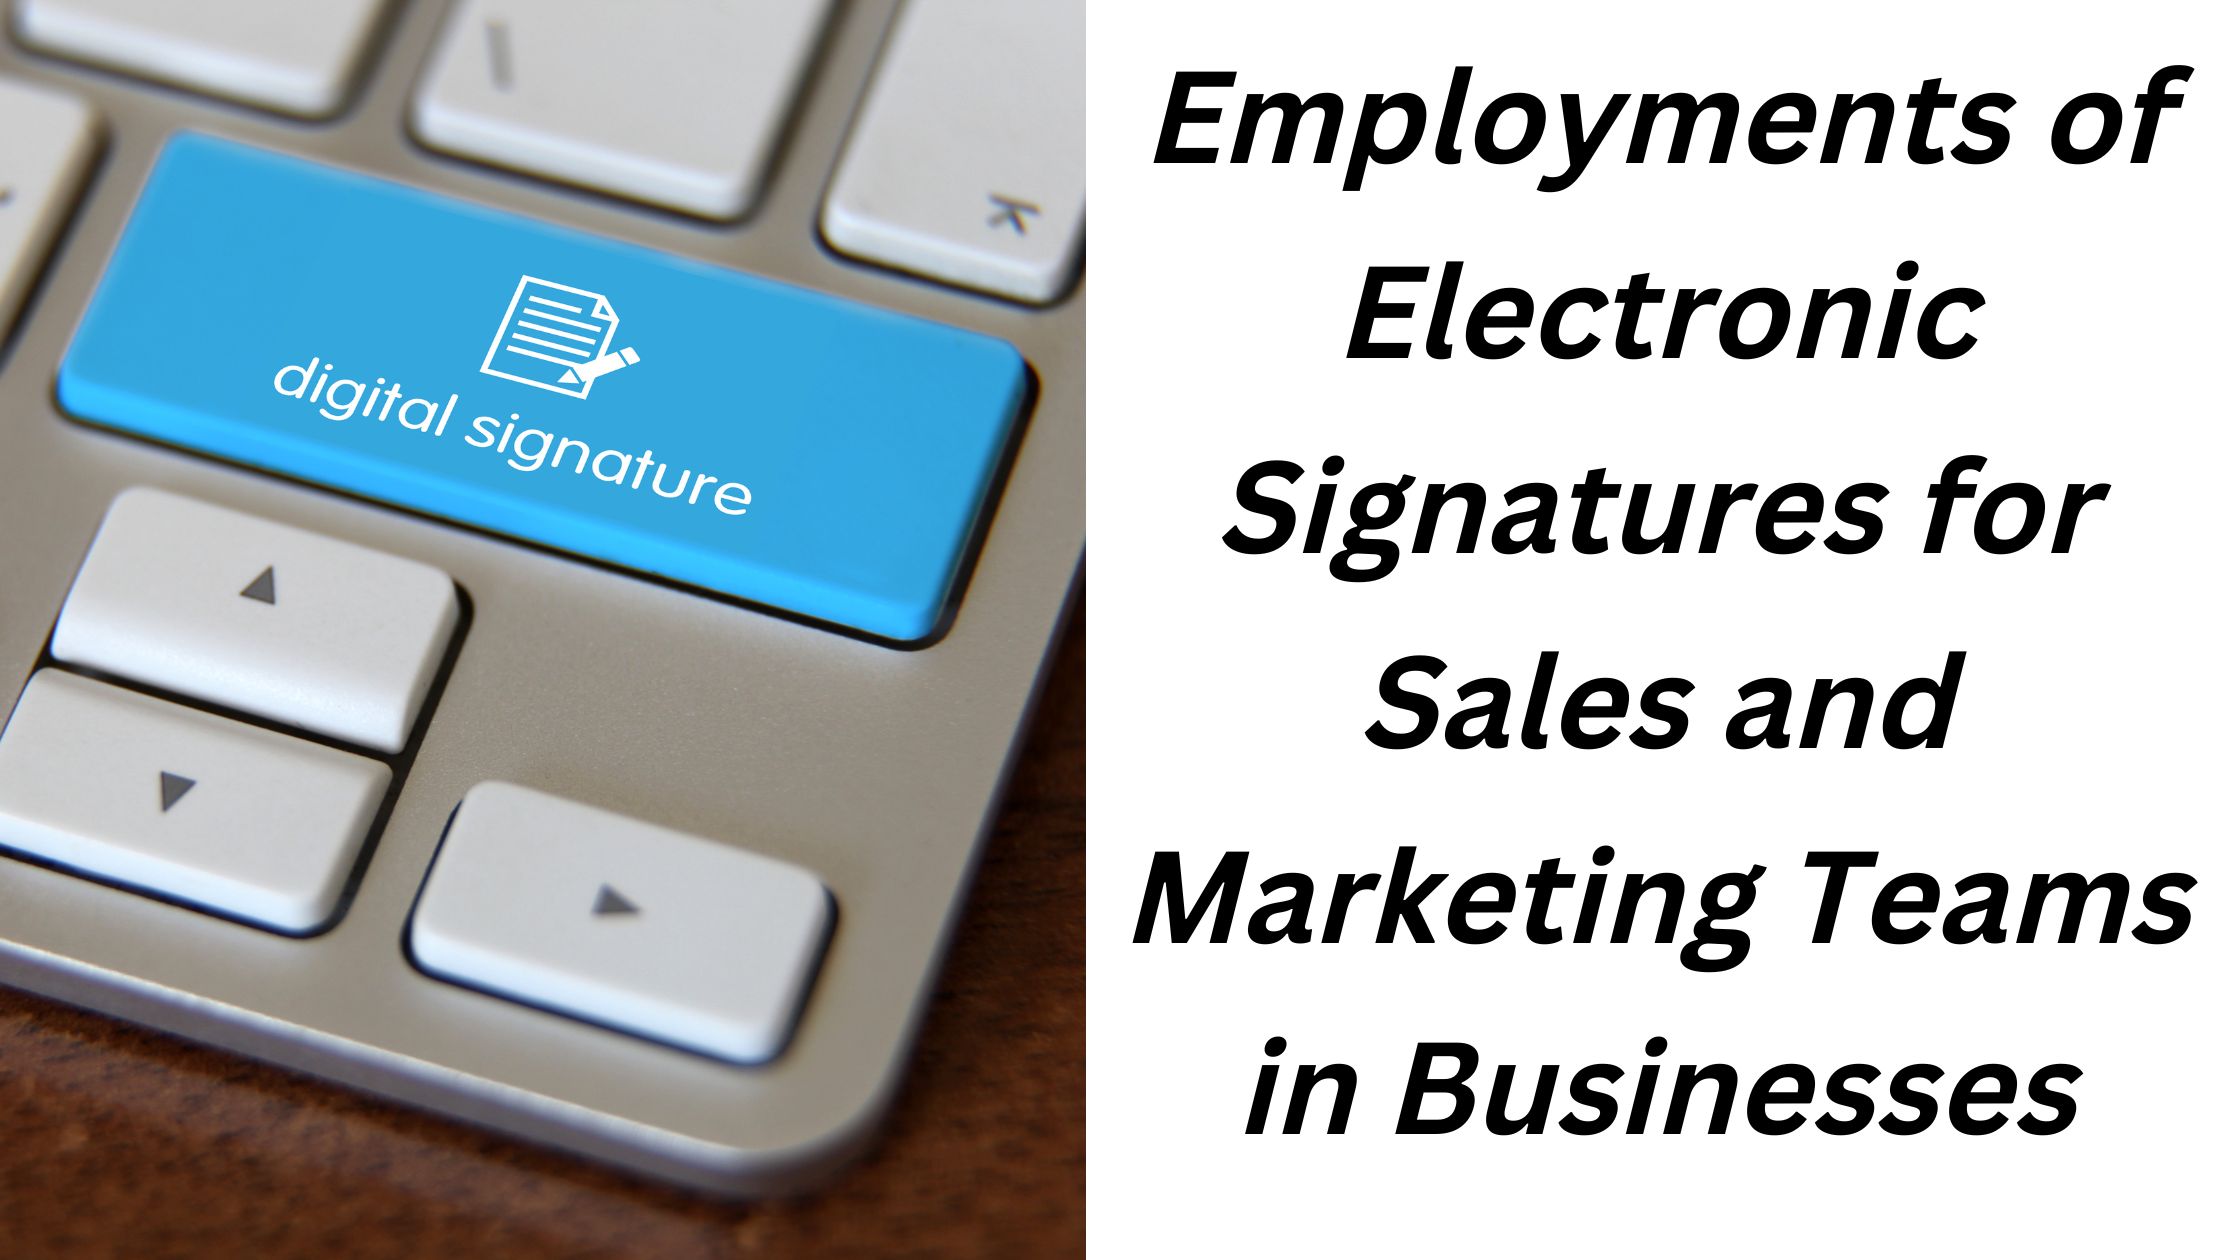 Employments of Electronic Signatures for Sales and Marketing Teams in Businesses￼